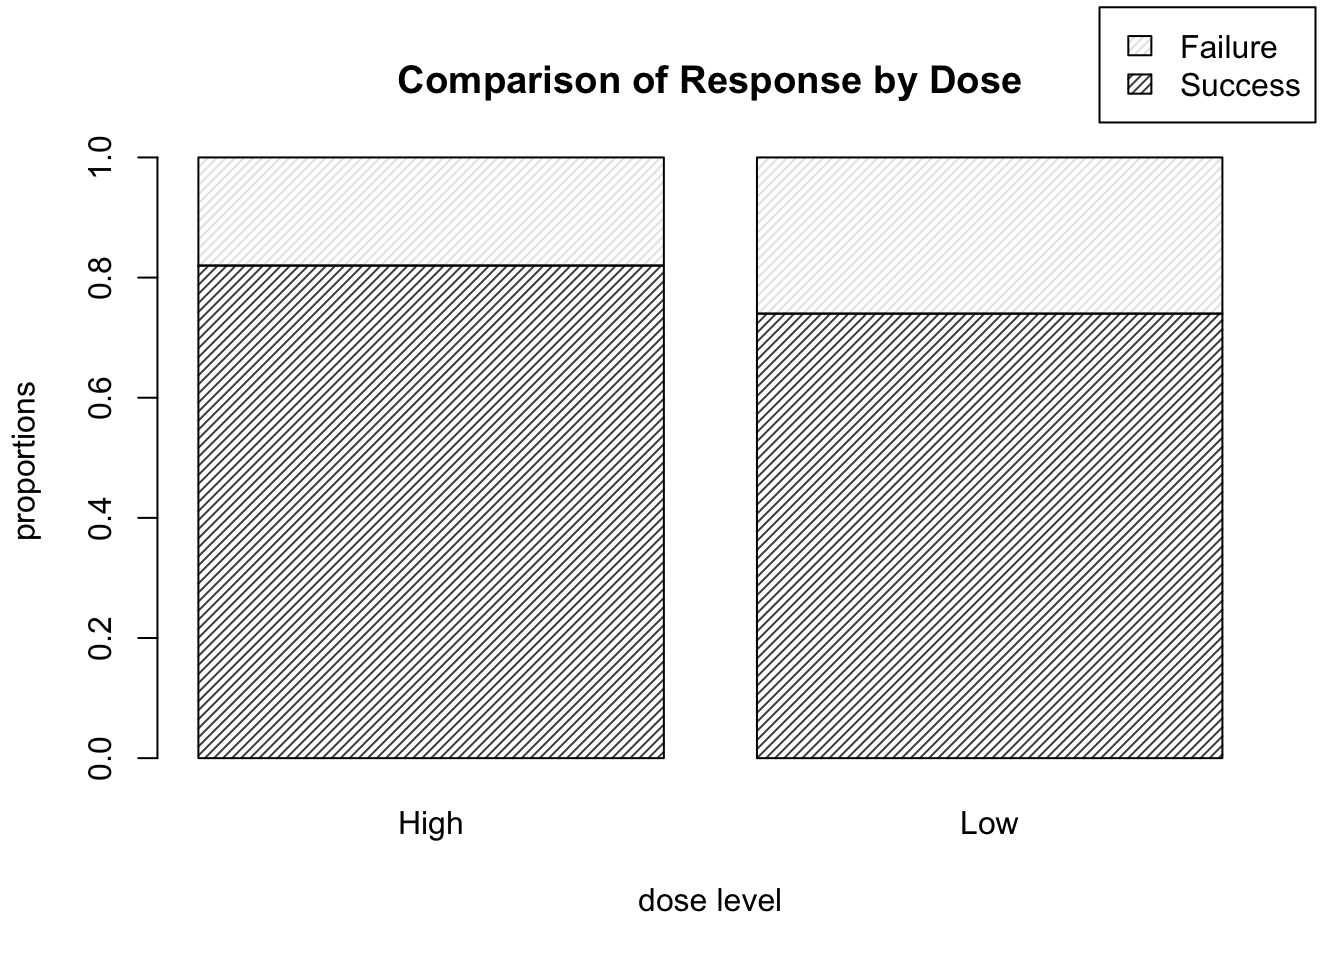 Barplots of treatment outcome proportions corresponding to each dose level.